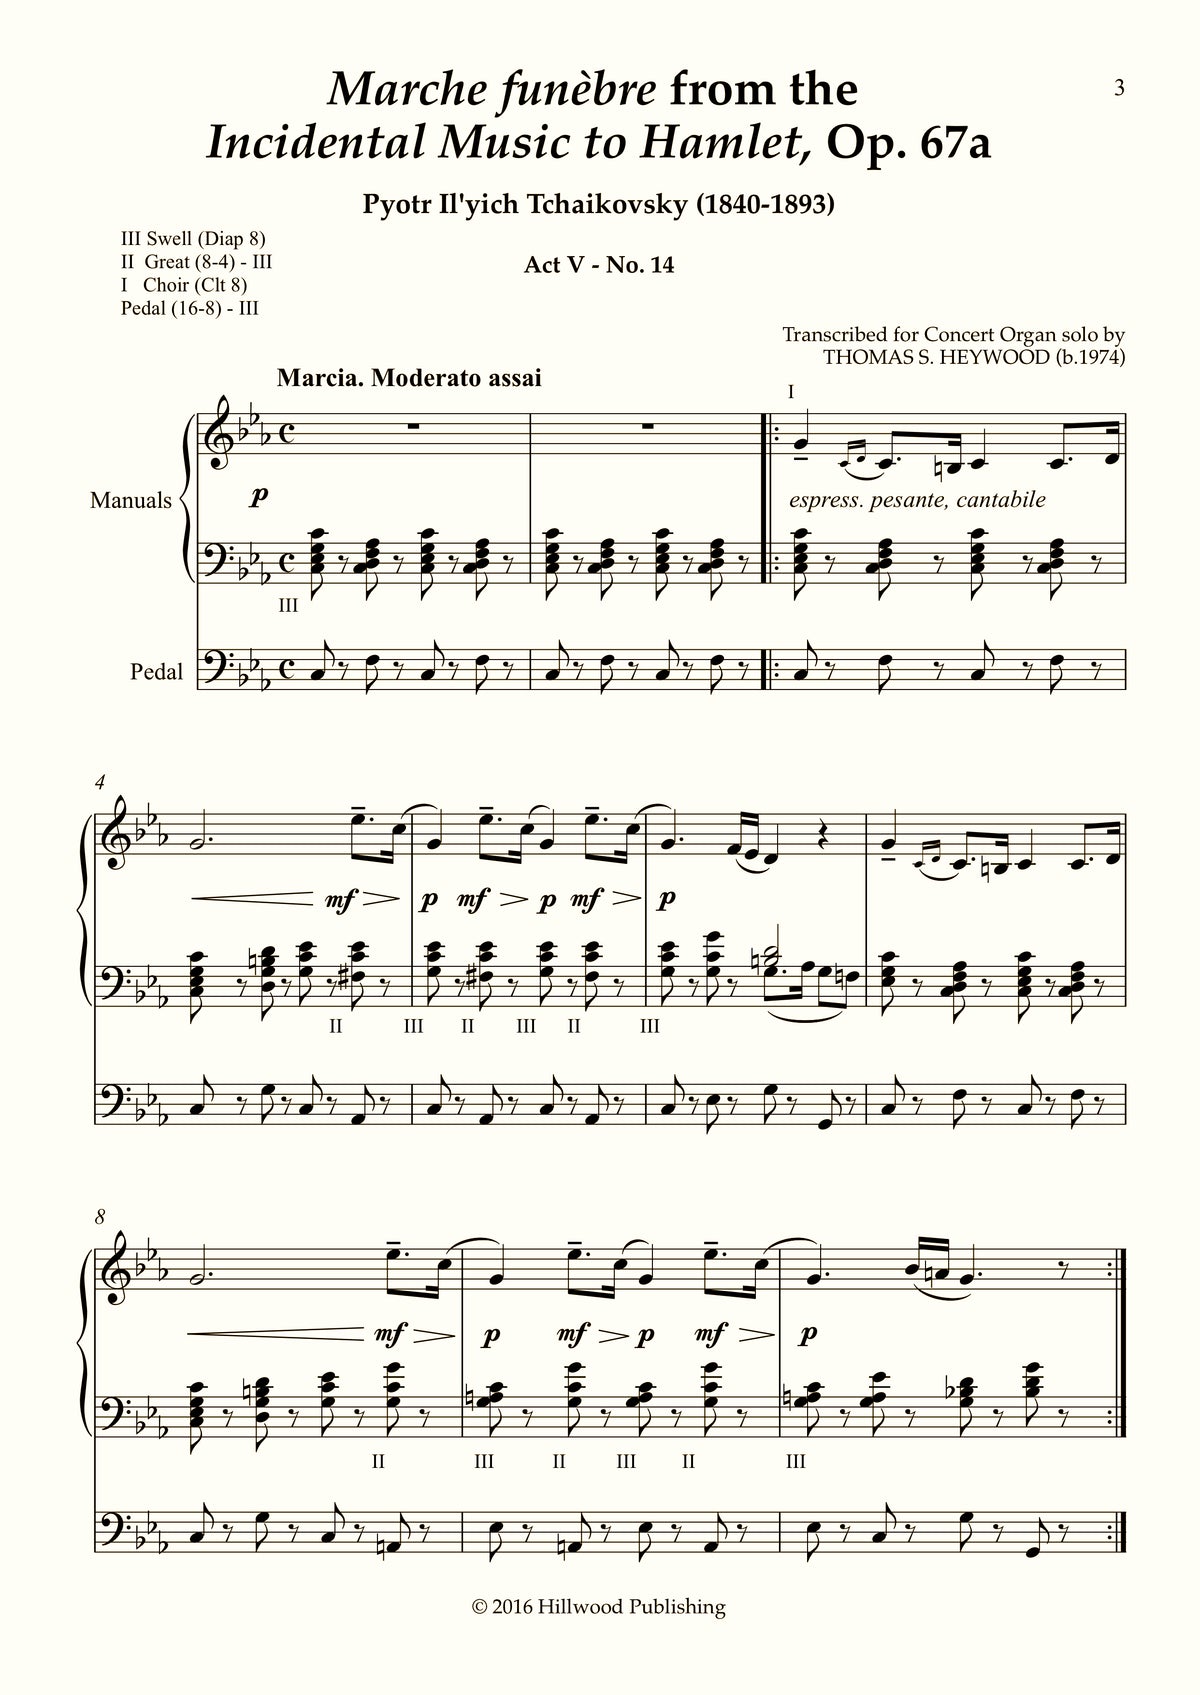 Tchaikovsky/Heywood - Marche funèbre from the Incidental Music to Hamlet, Op. 67a (Score)